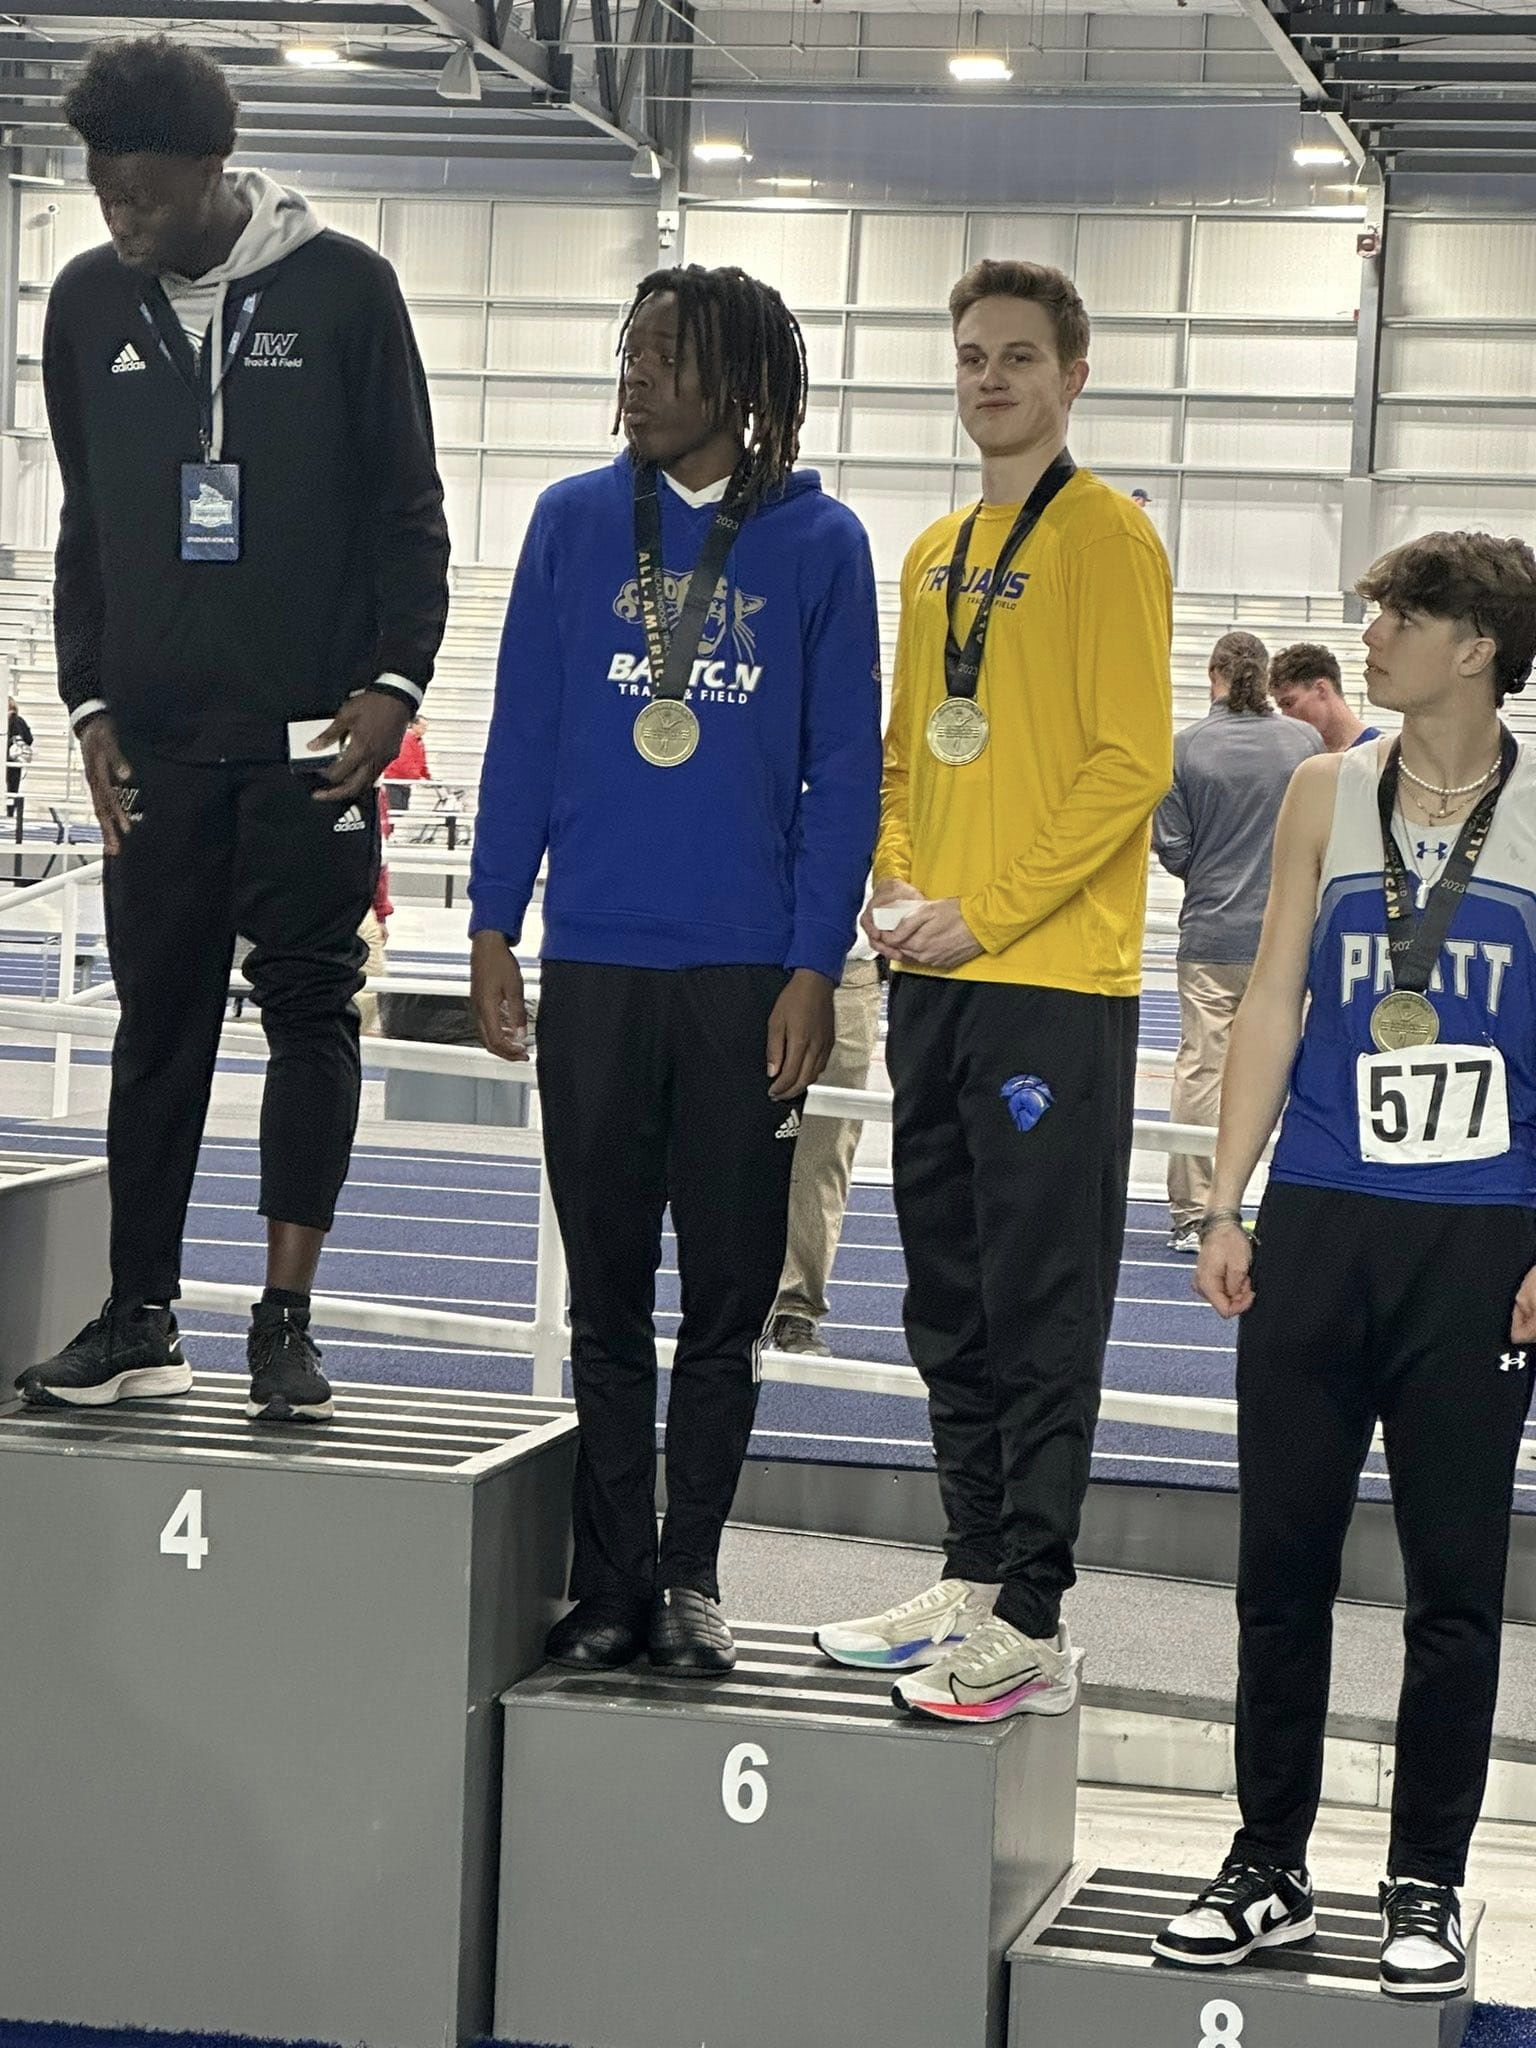 NIACC's Fabian Steene (third from left) placed sixth in the high jump Friday at the NJCAA national indoor track and field championships in Topeka, Kan.